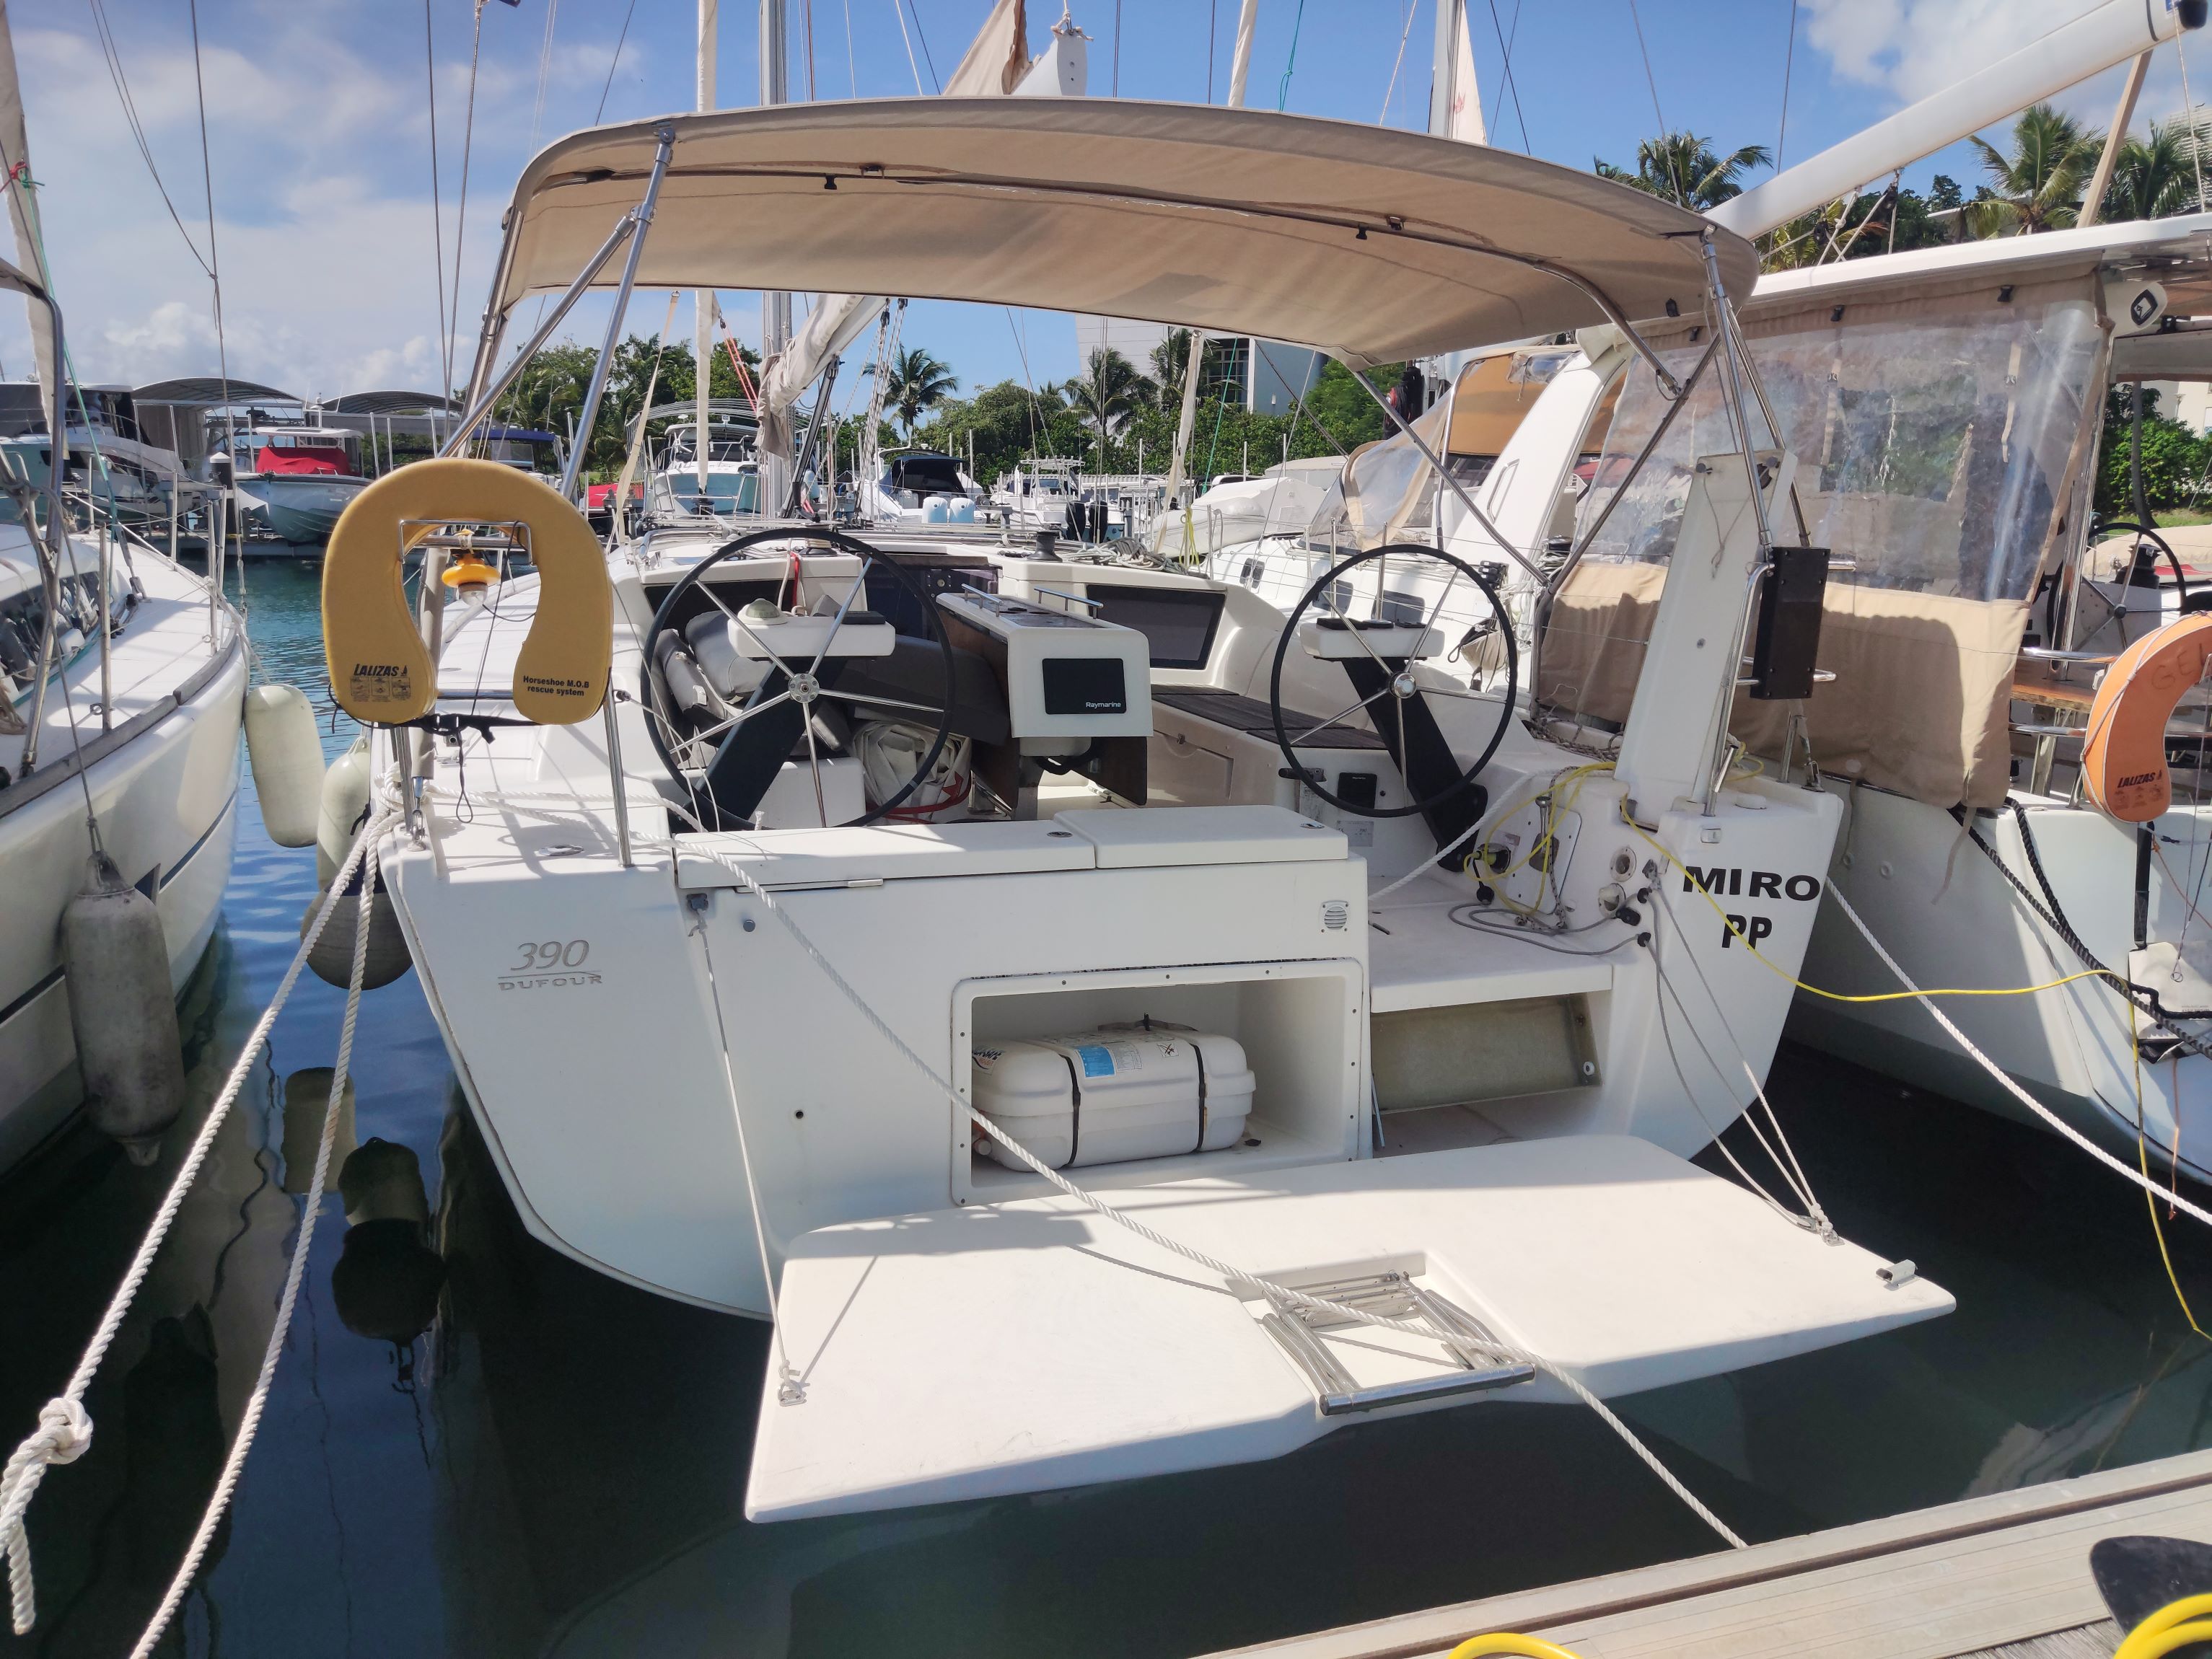 Dufour 390 GL - Sailboat Charter Guadeloupe & Boat hire in Guadeloupe Pointe a Pitre Marina de Bas du Fort 2